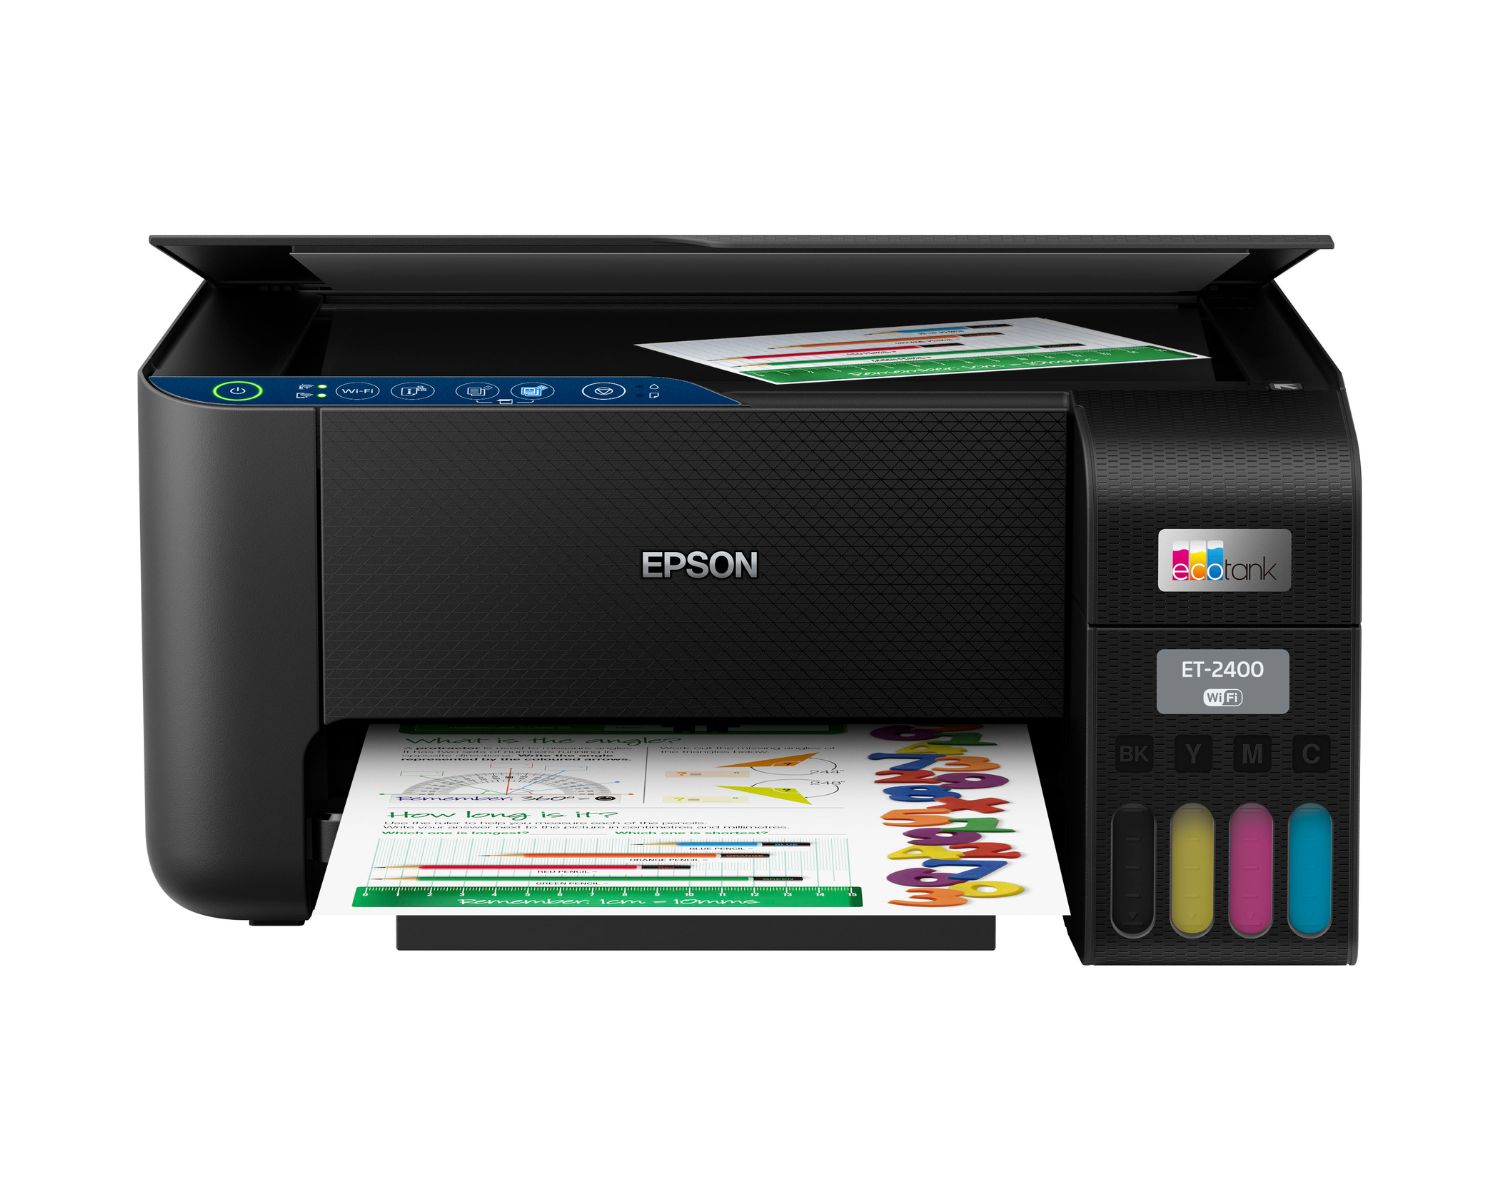 Epson Printer: How To Scan